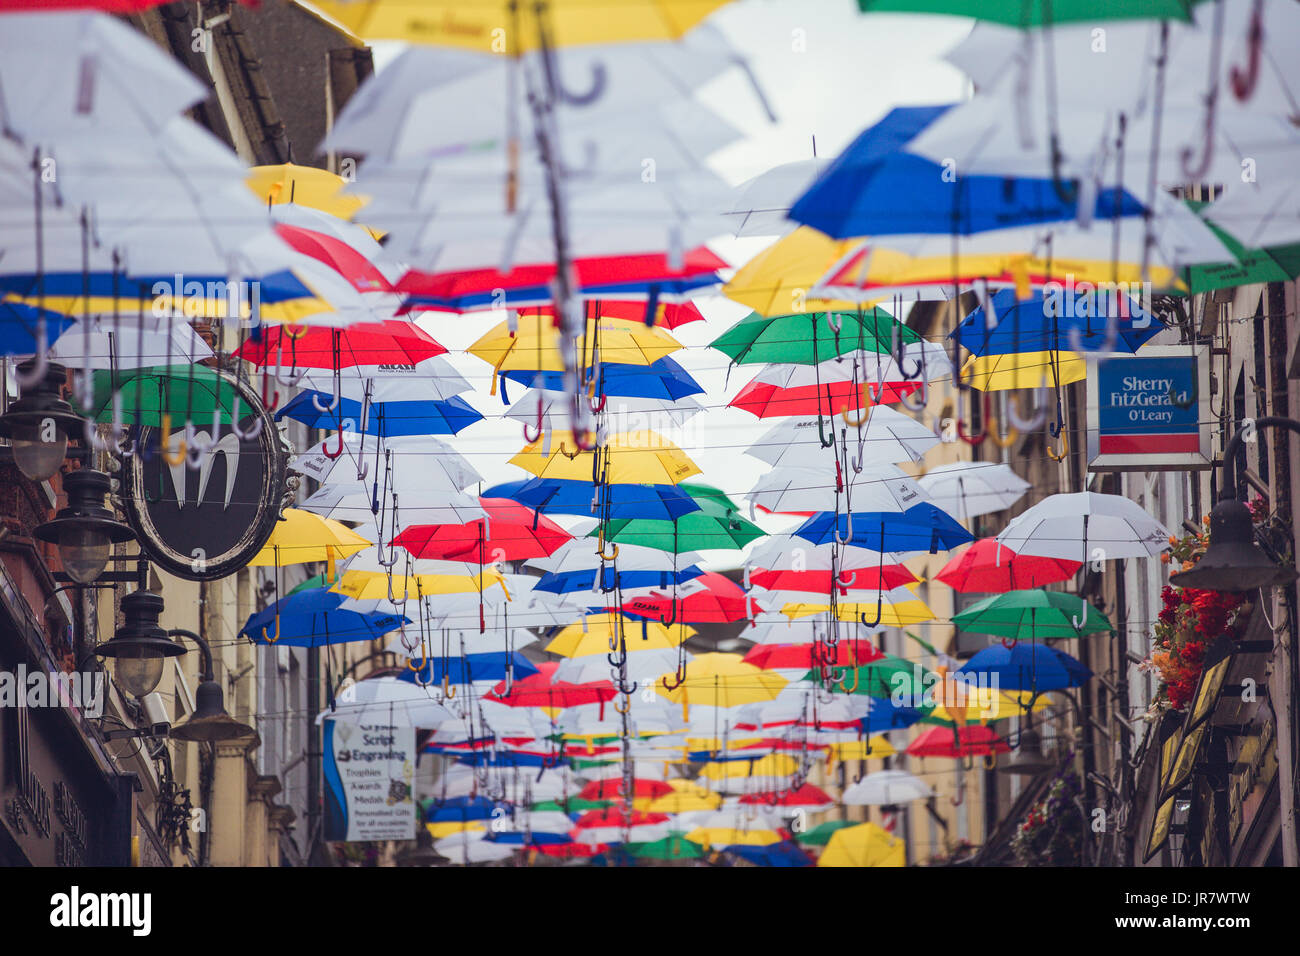 Slaney street in Enniscorthy Ireland decorated with floating umbrellas for the Rockin` Food Festival August Bank Holiday Stock Photo